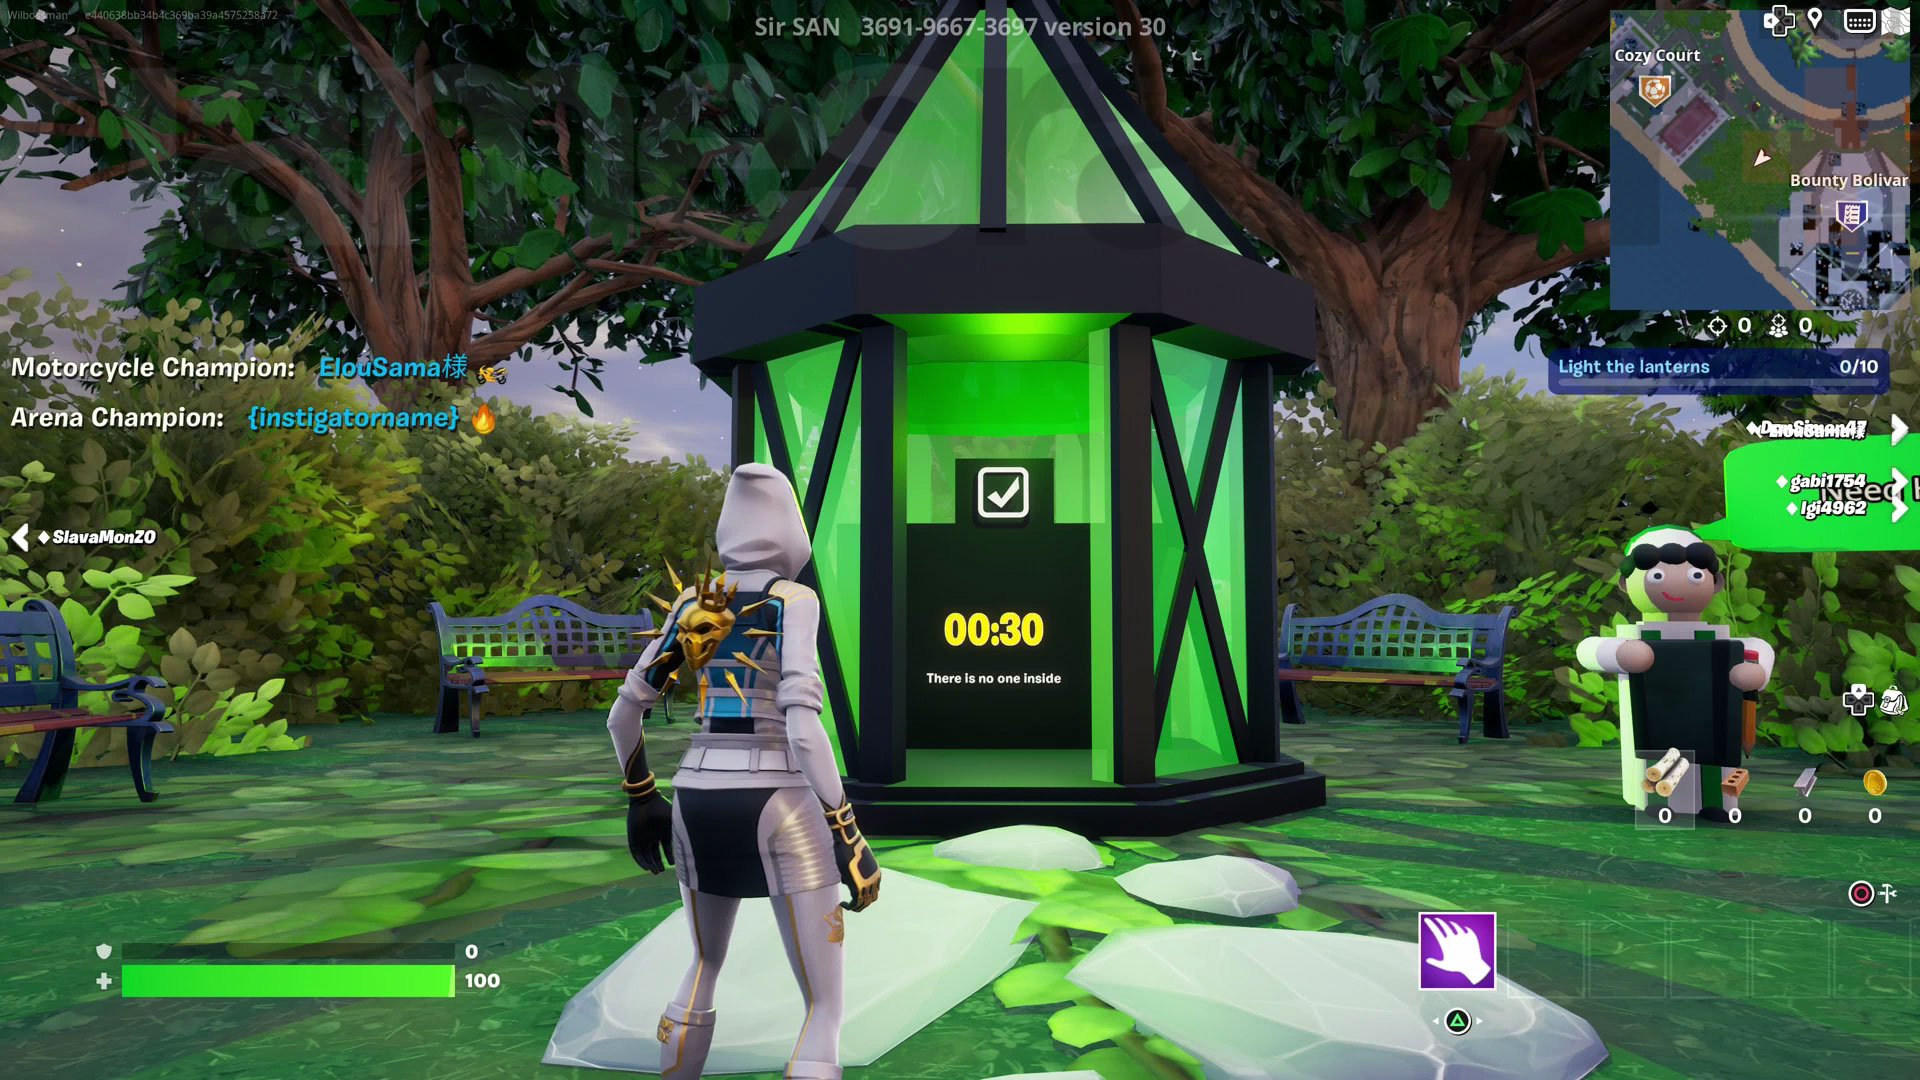 Fortnite Lantern Puzzle: how to solve it - Game News